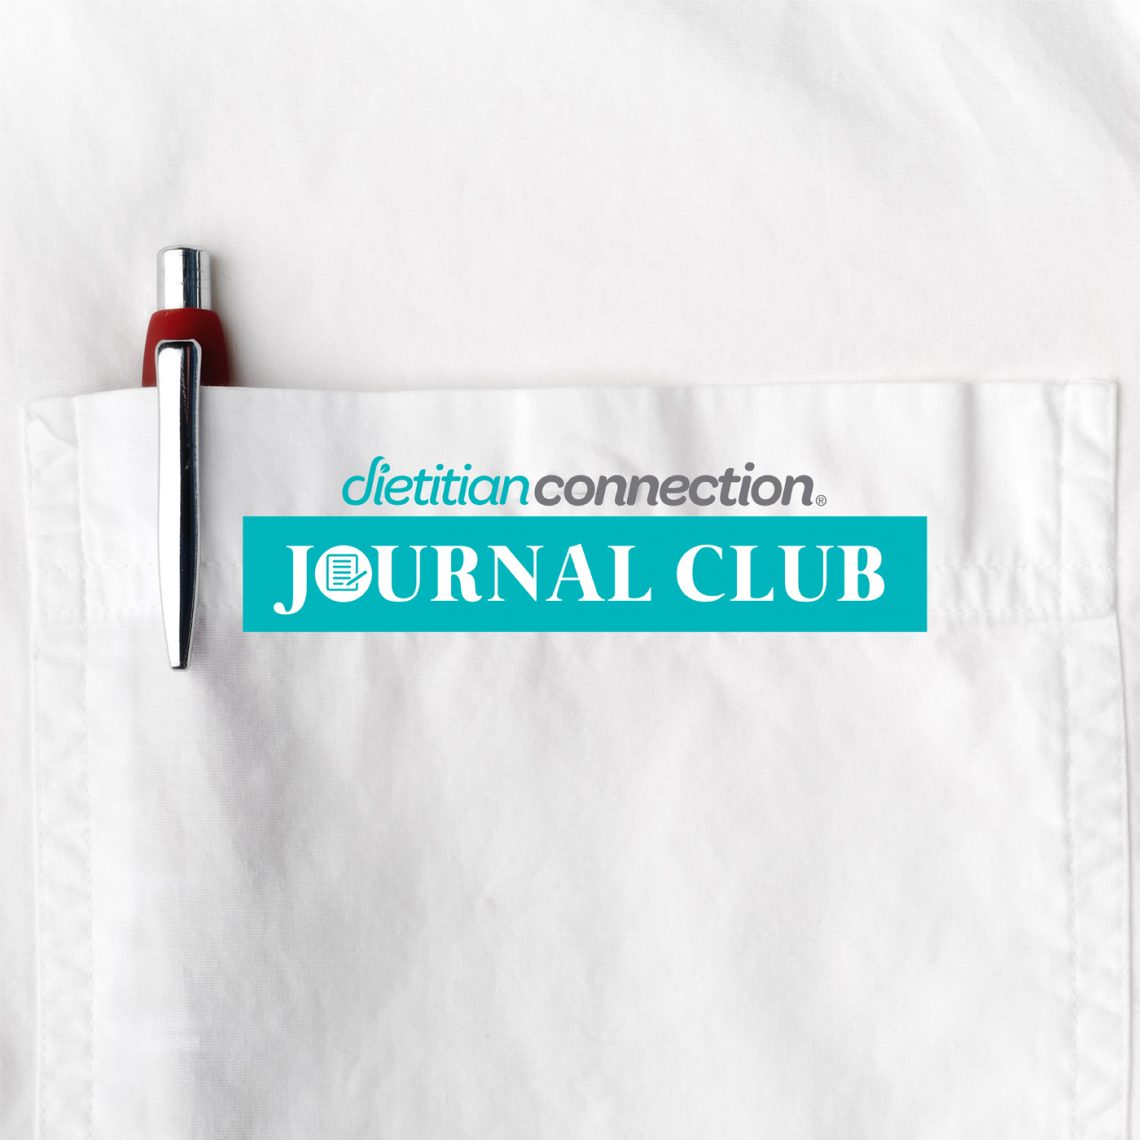 Welcome to the DC Journal Club | Dietitian Connection